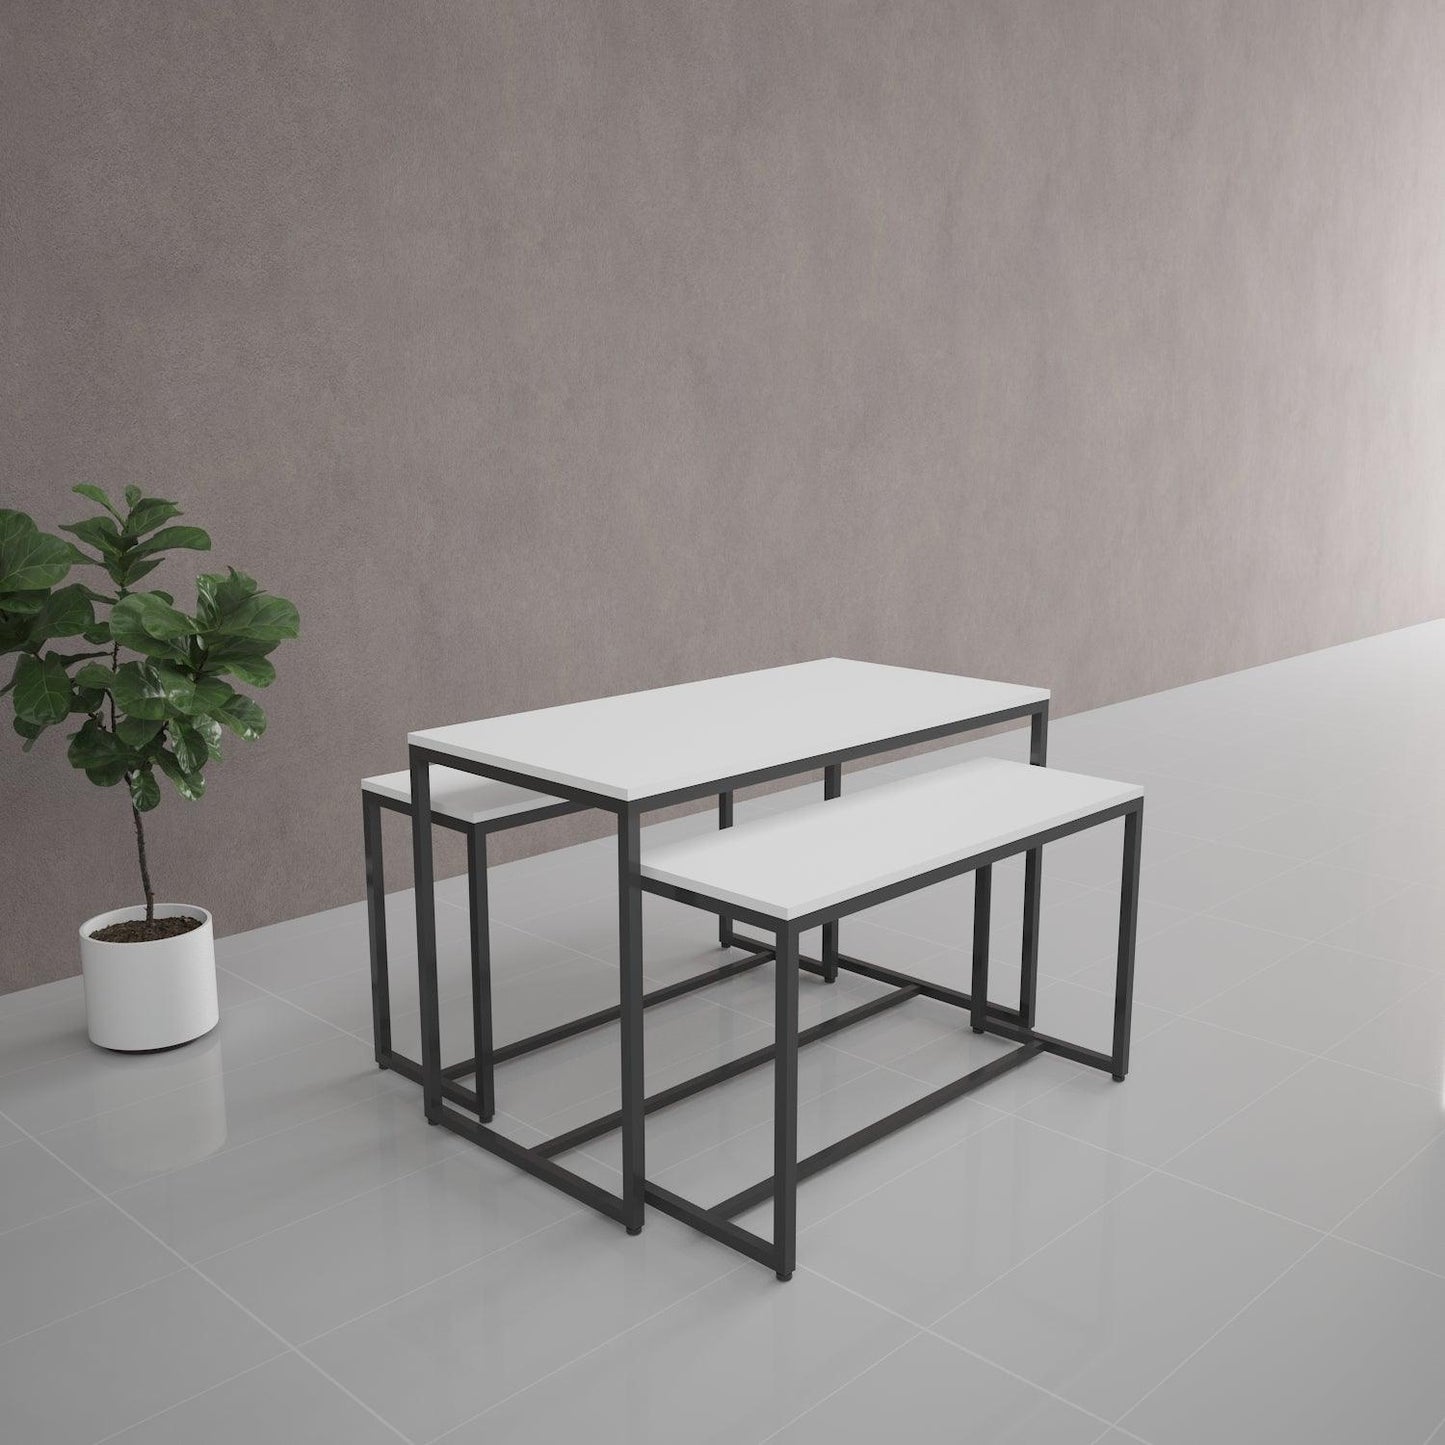 Nesting Table With Small Tables - Fixturic